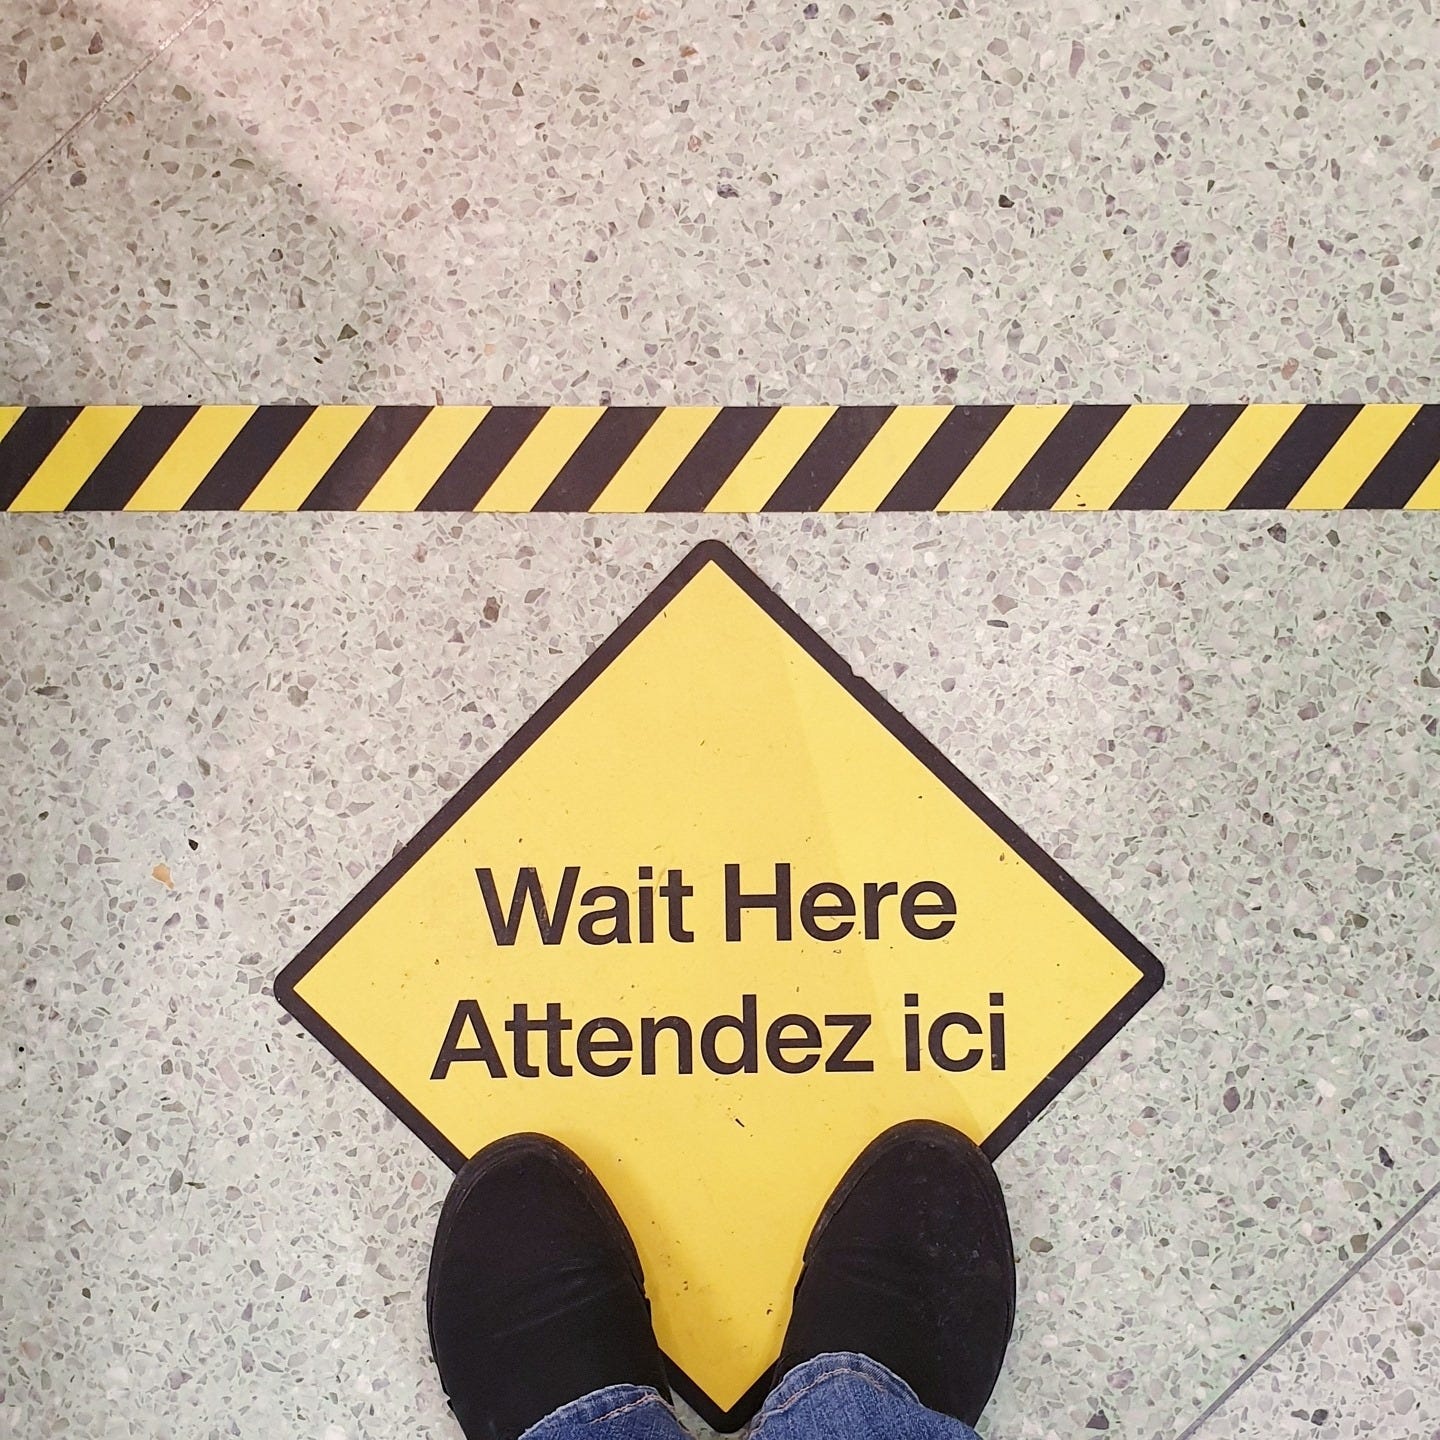 A shot of the ground with a yellow tape to make the start of the queue line and a yellow rhombus with the phrase "Wait here" in English and French.